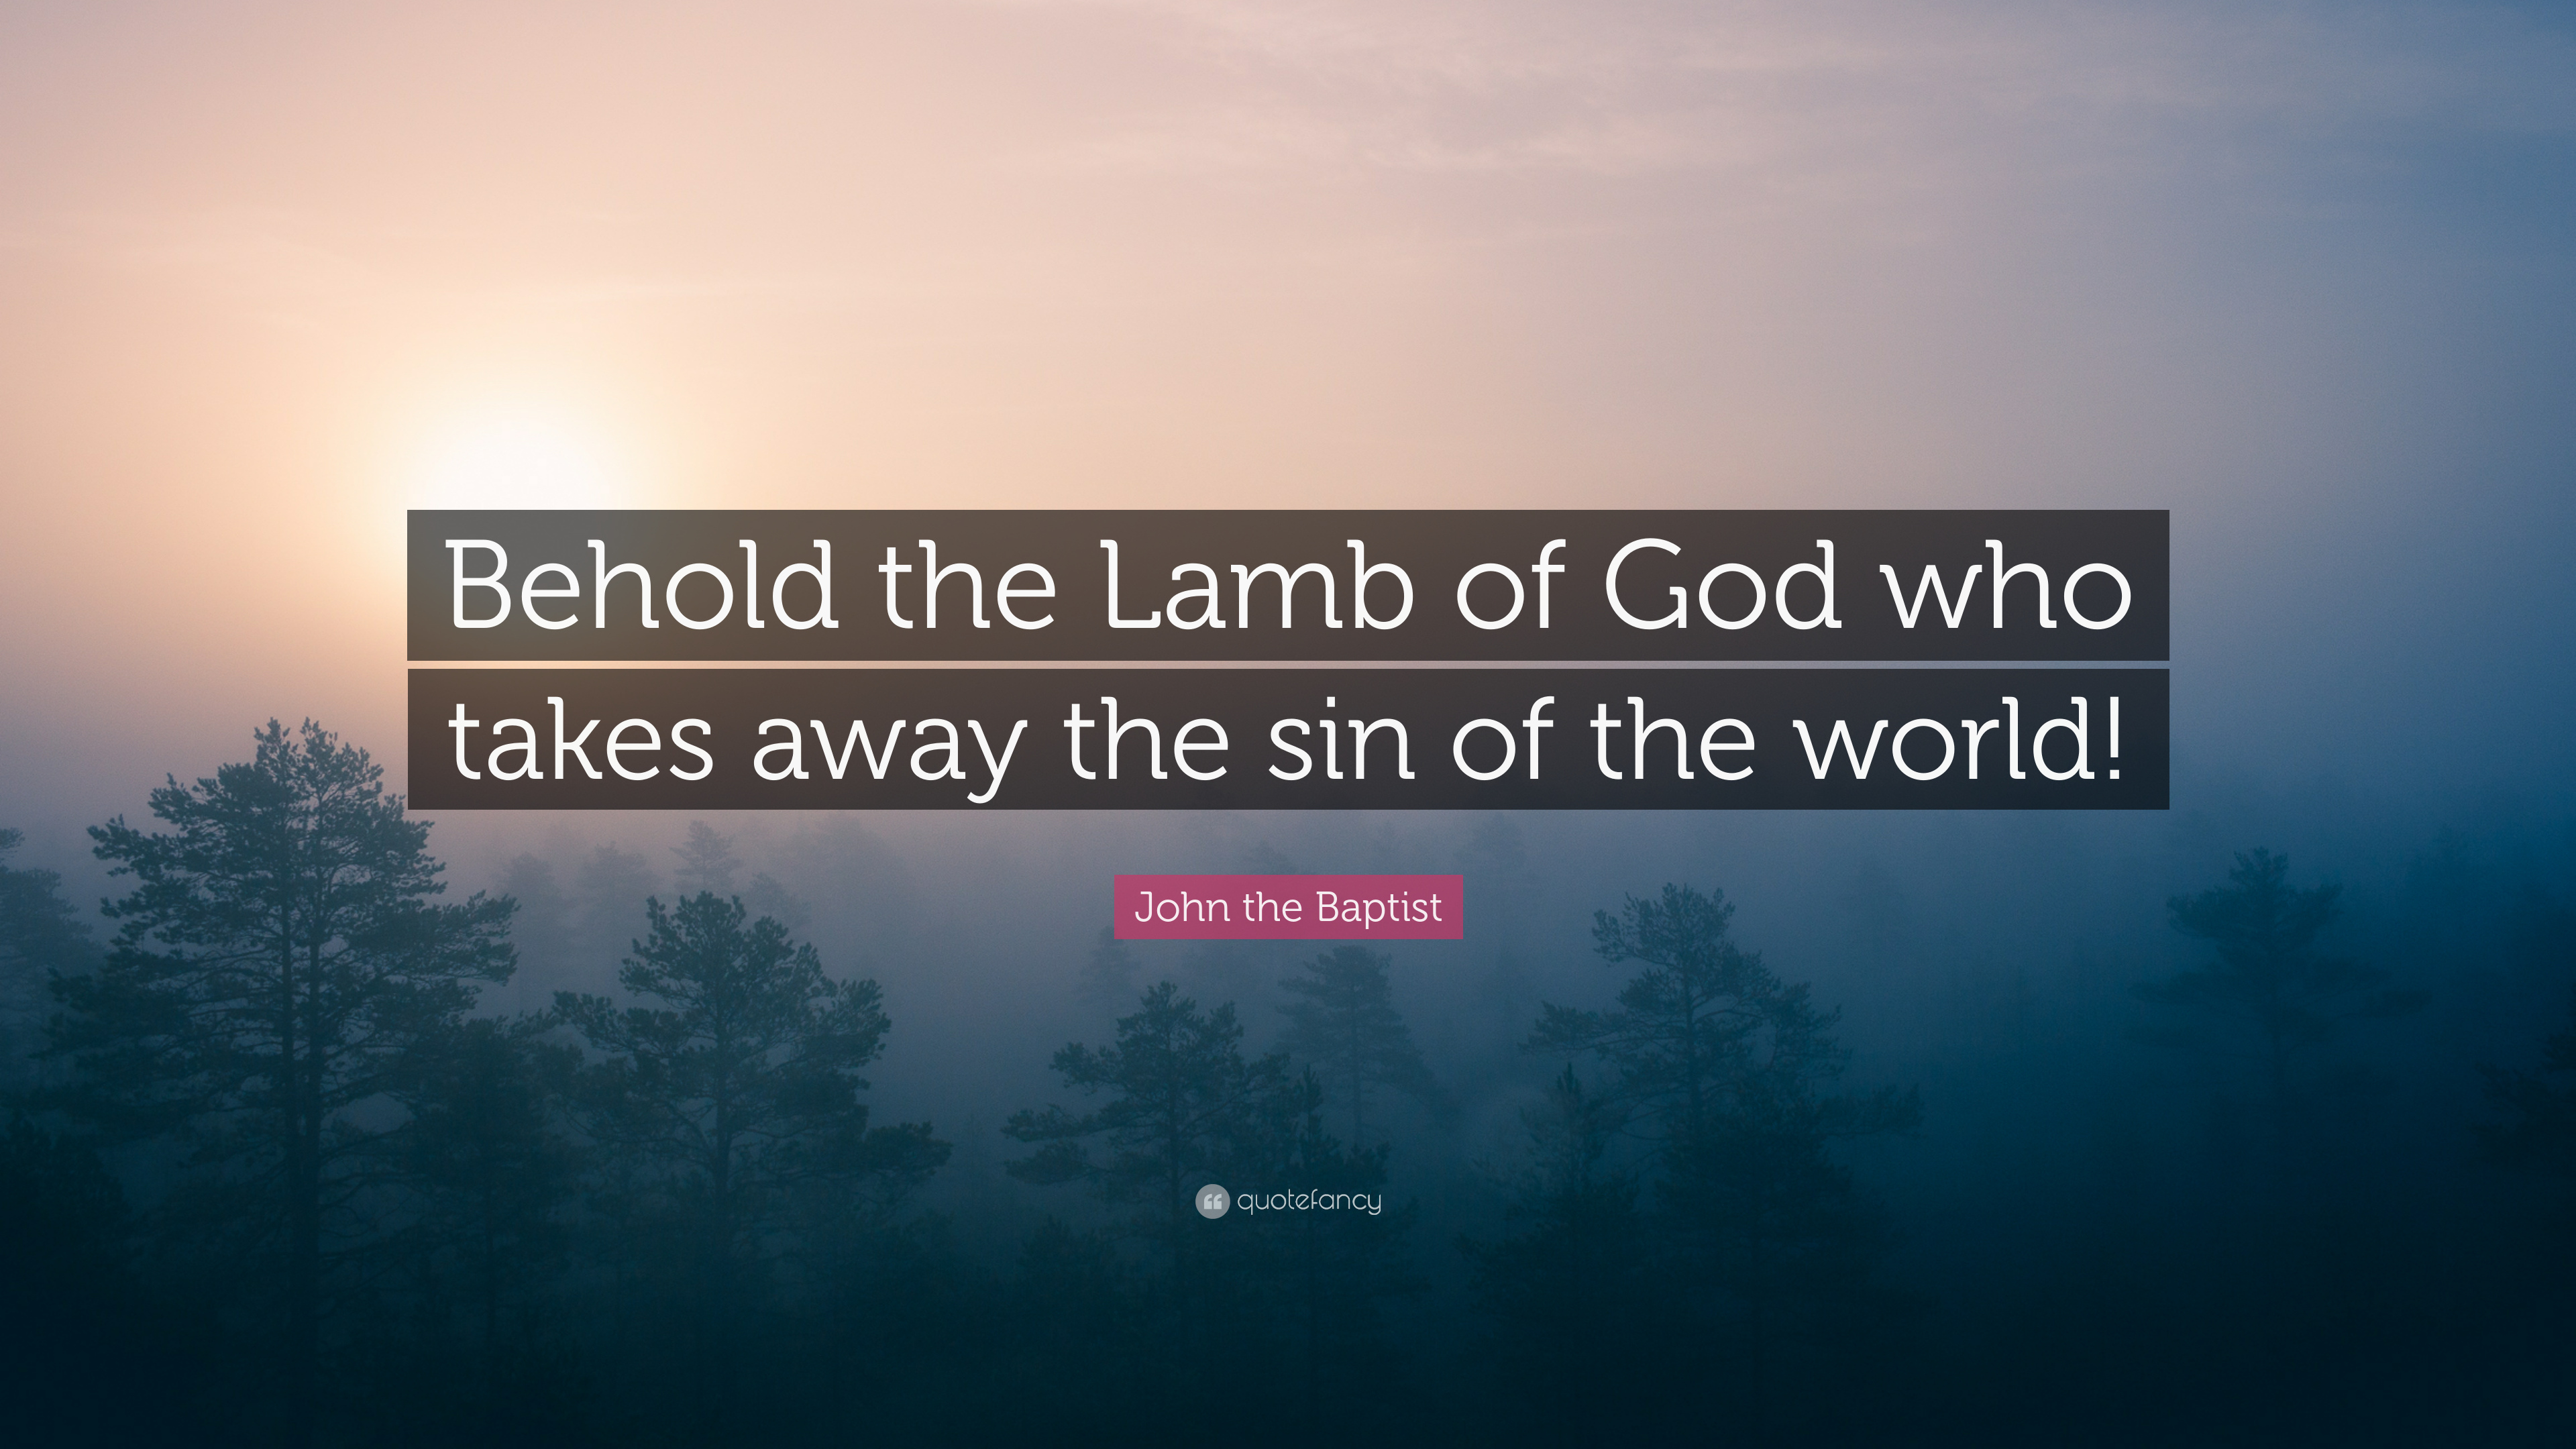 John The Baptist Quote - Been There All Along - HD Wallpaper 